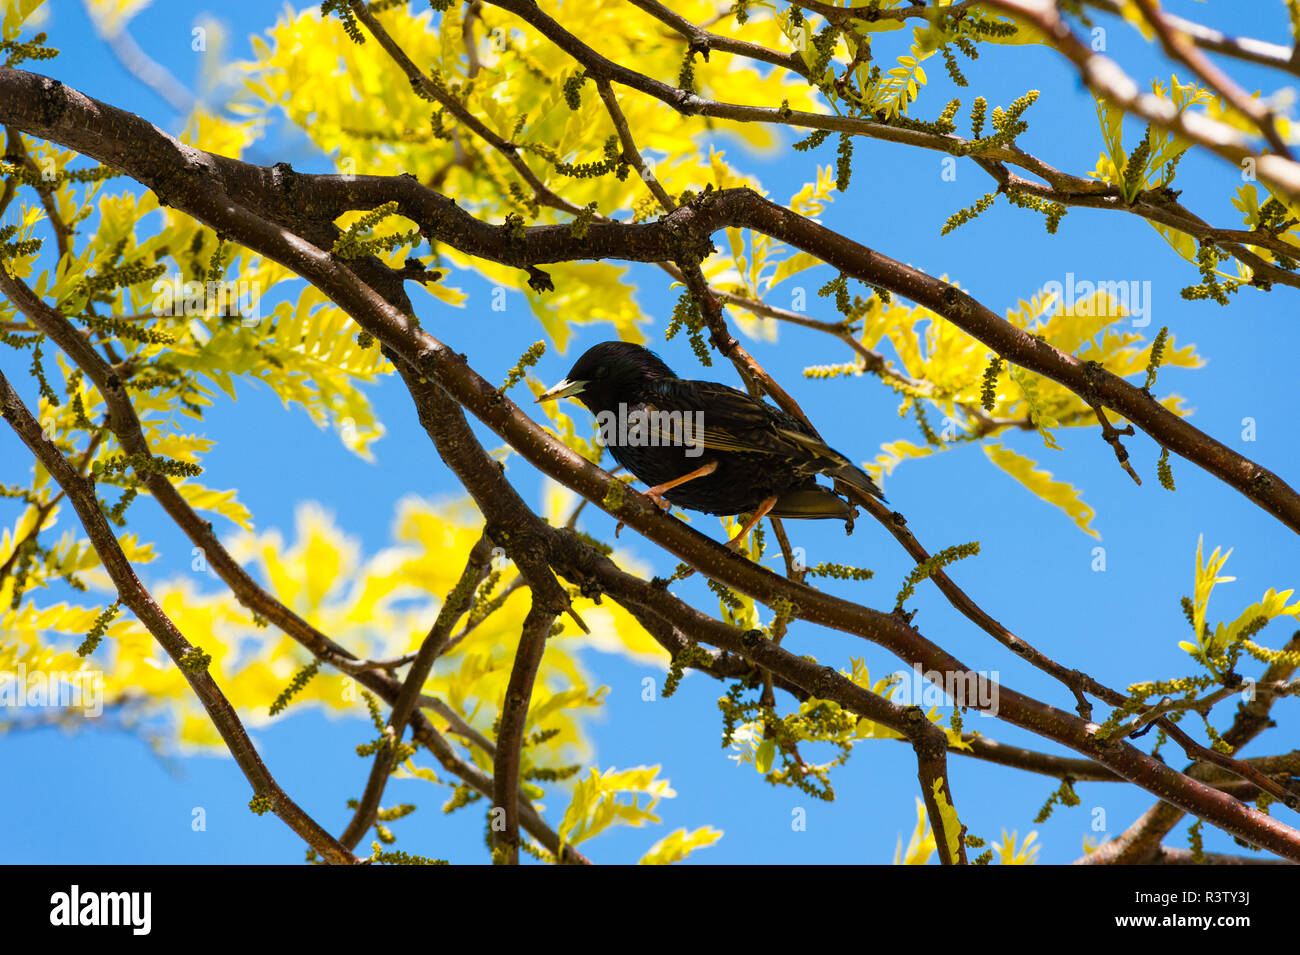 Single starling among branches and yellow leaves Stock Photo